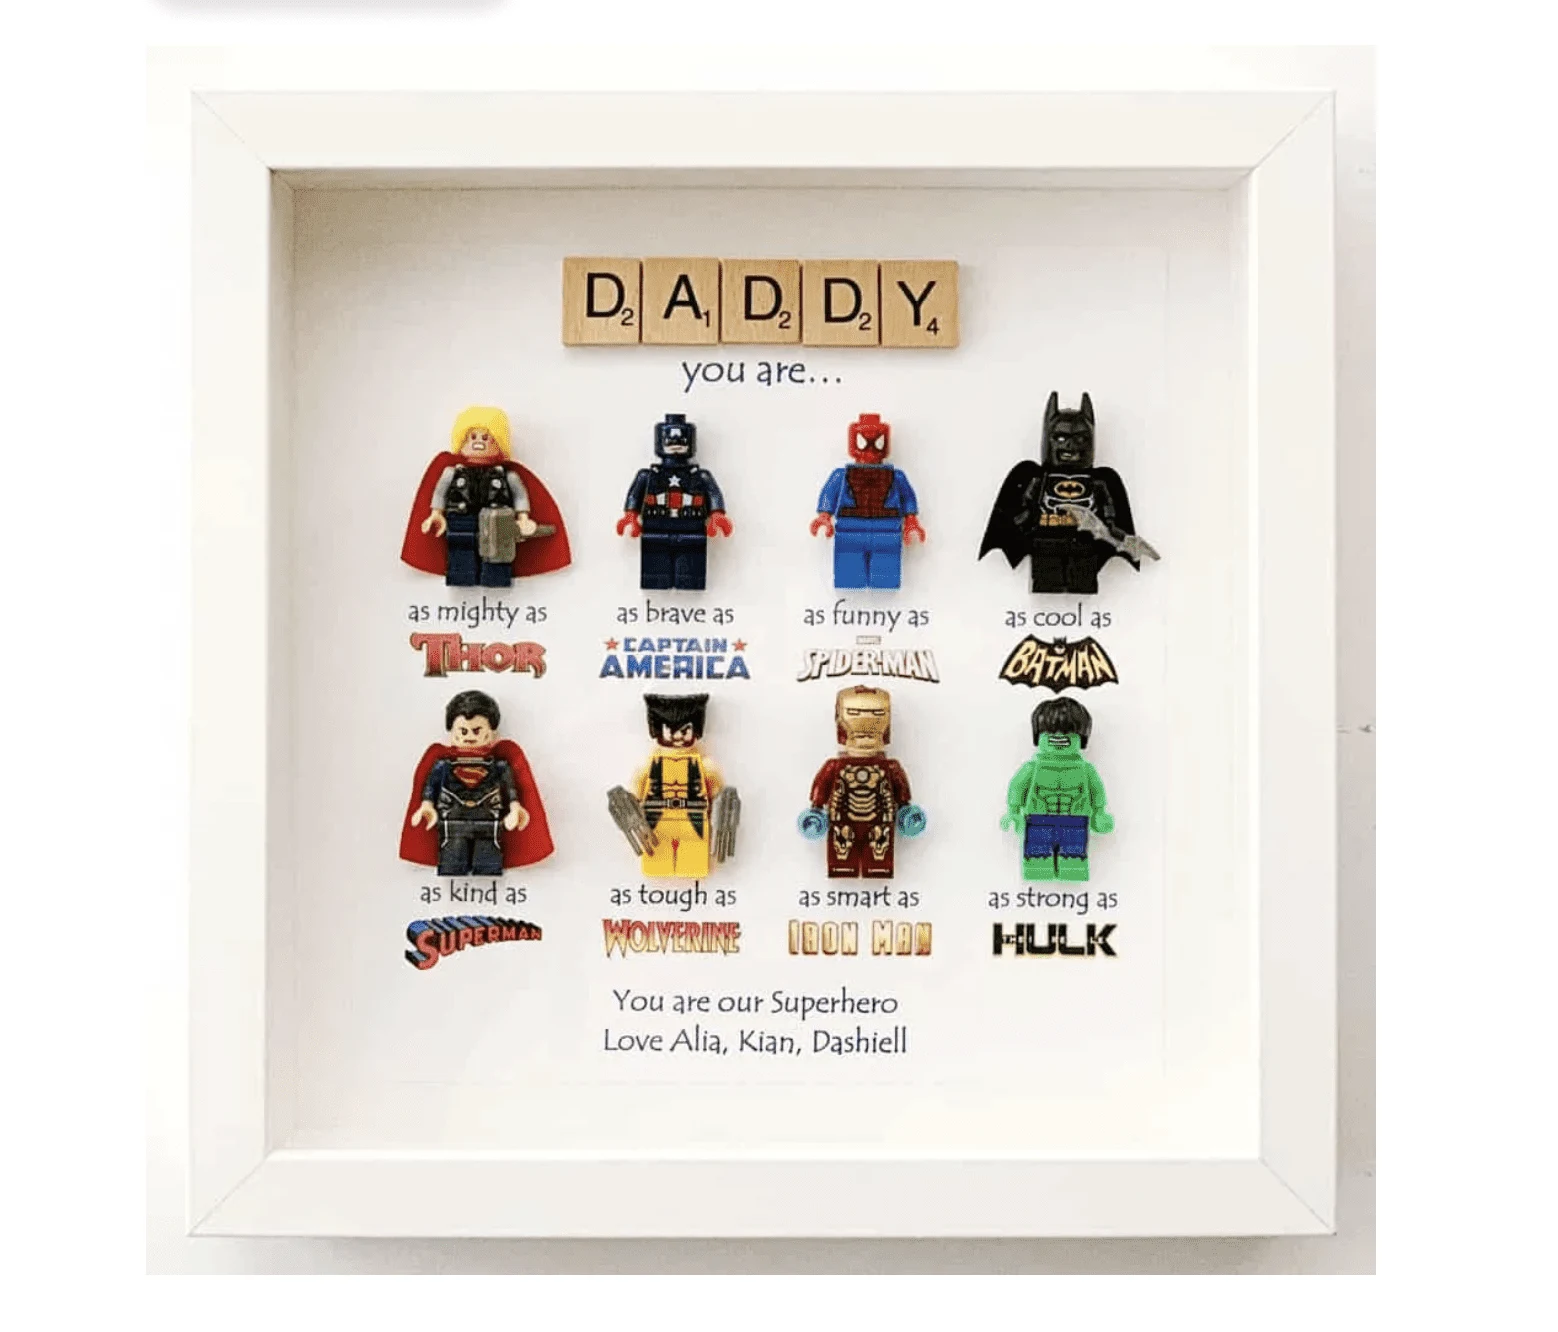 personalized father's day gifts